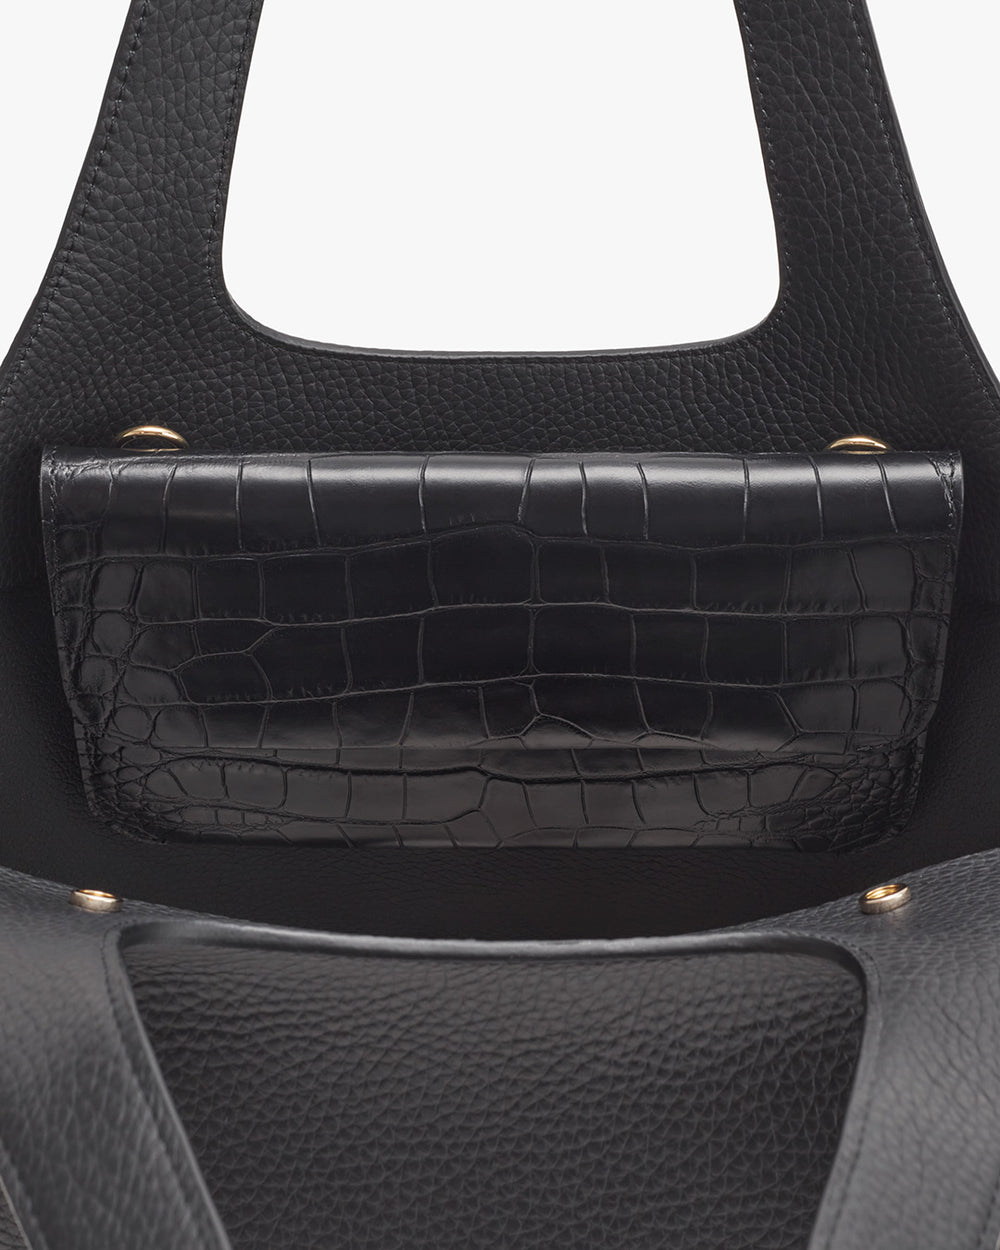 Close-up view of a handbag with a textured front pocket.